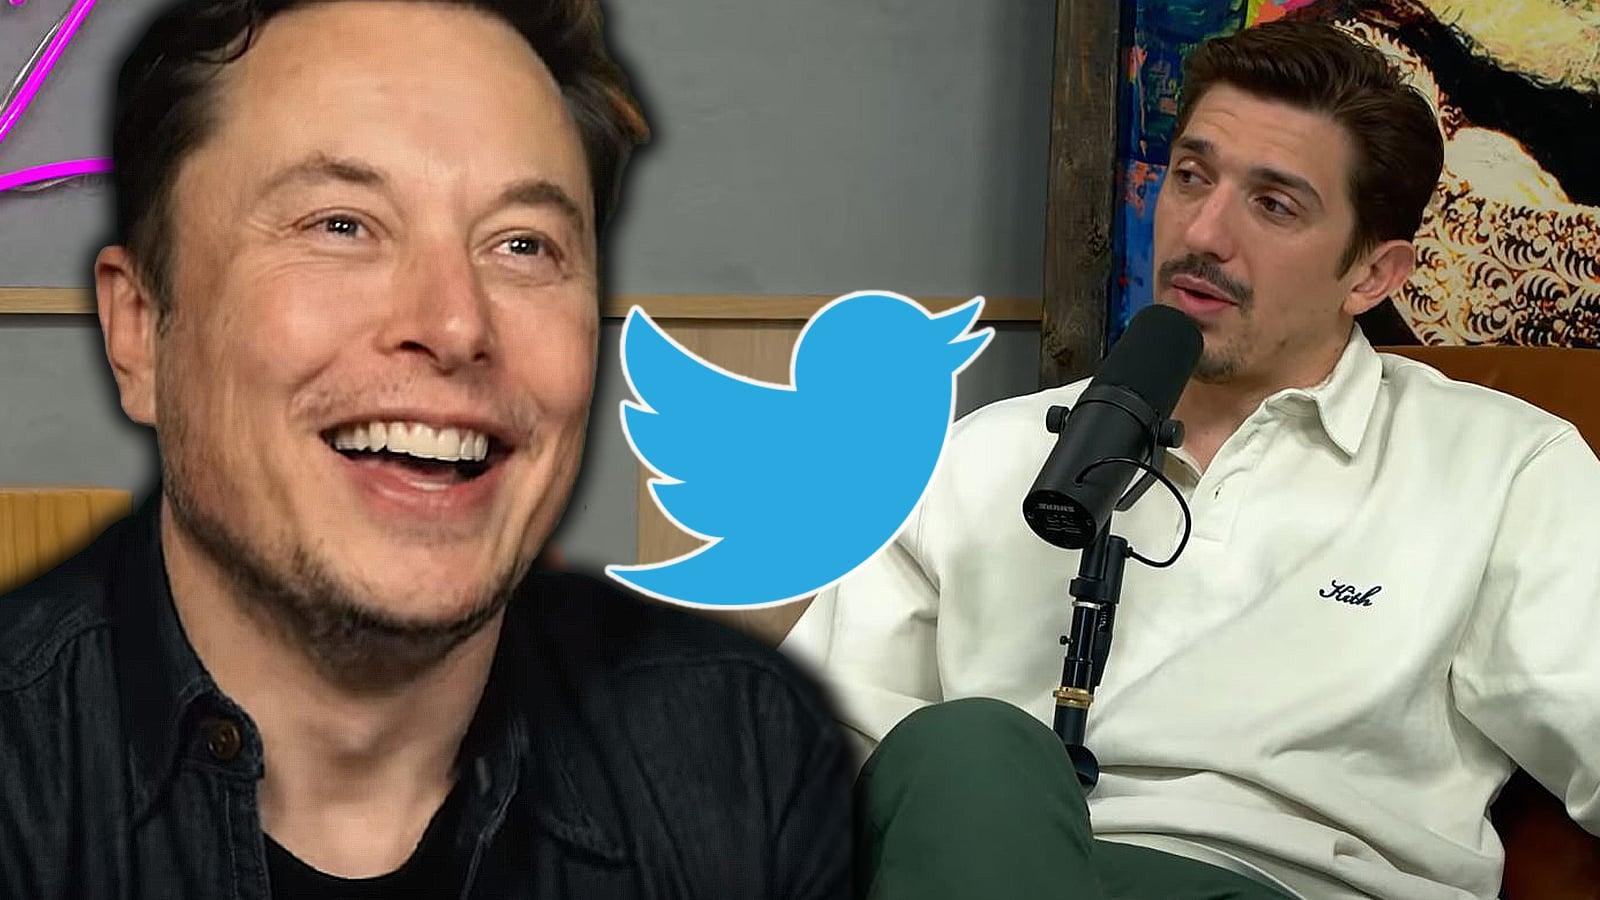 Andrew Schulz explains why Elon Musk should be on Twitter's board of directors